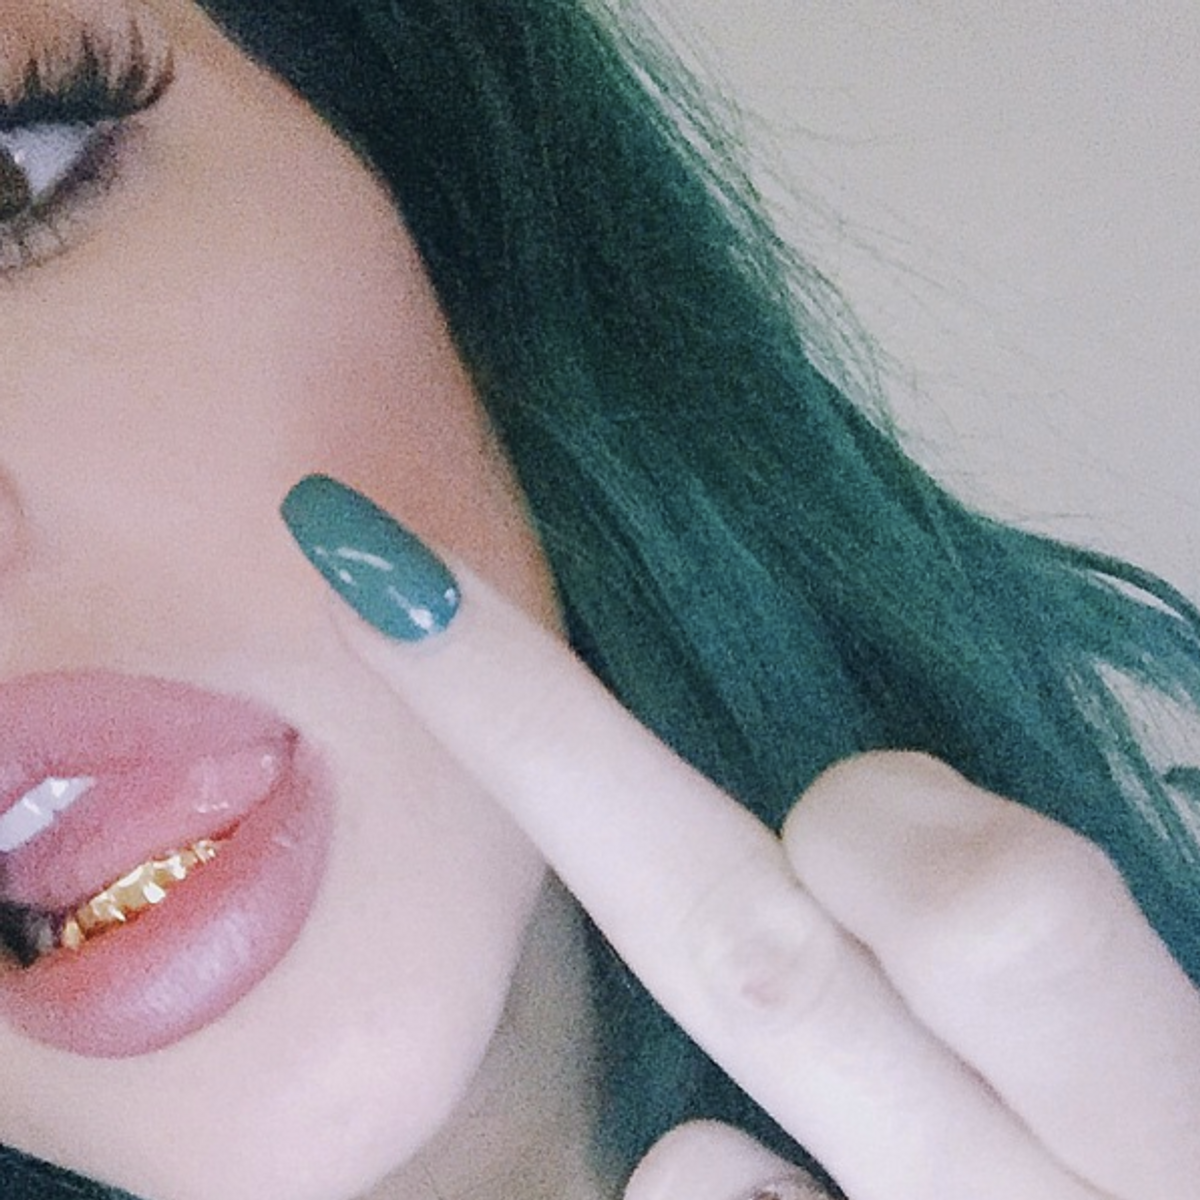 9 Reasons why Kylie is the Worst Kardashian